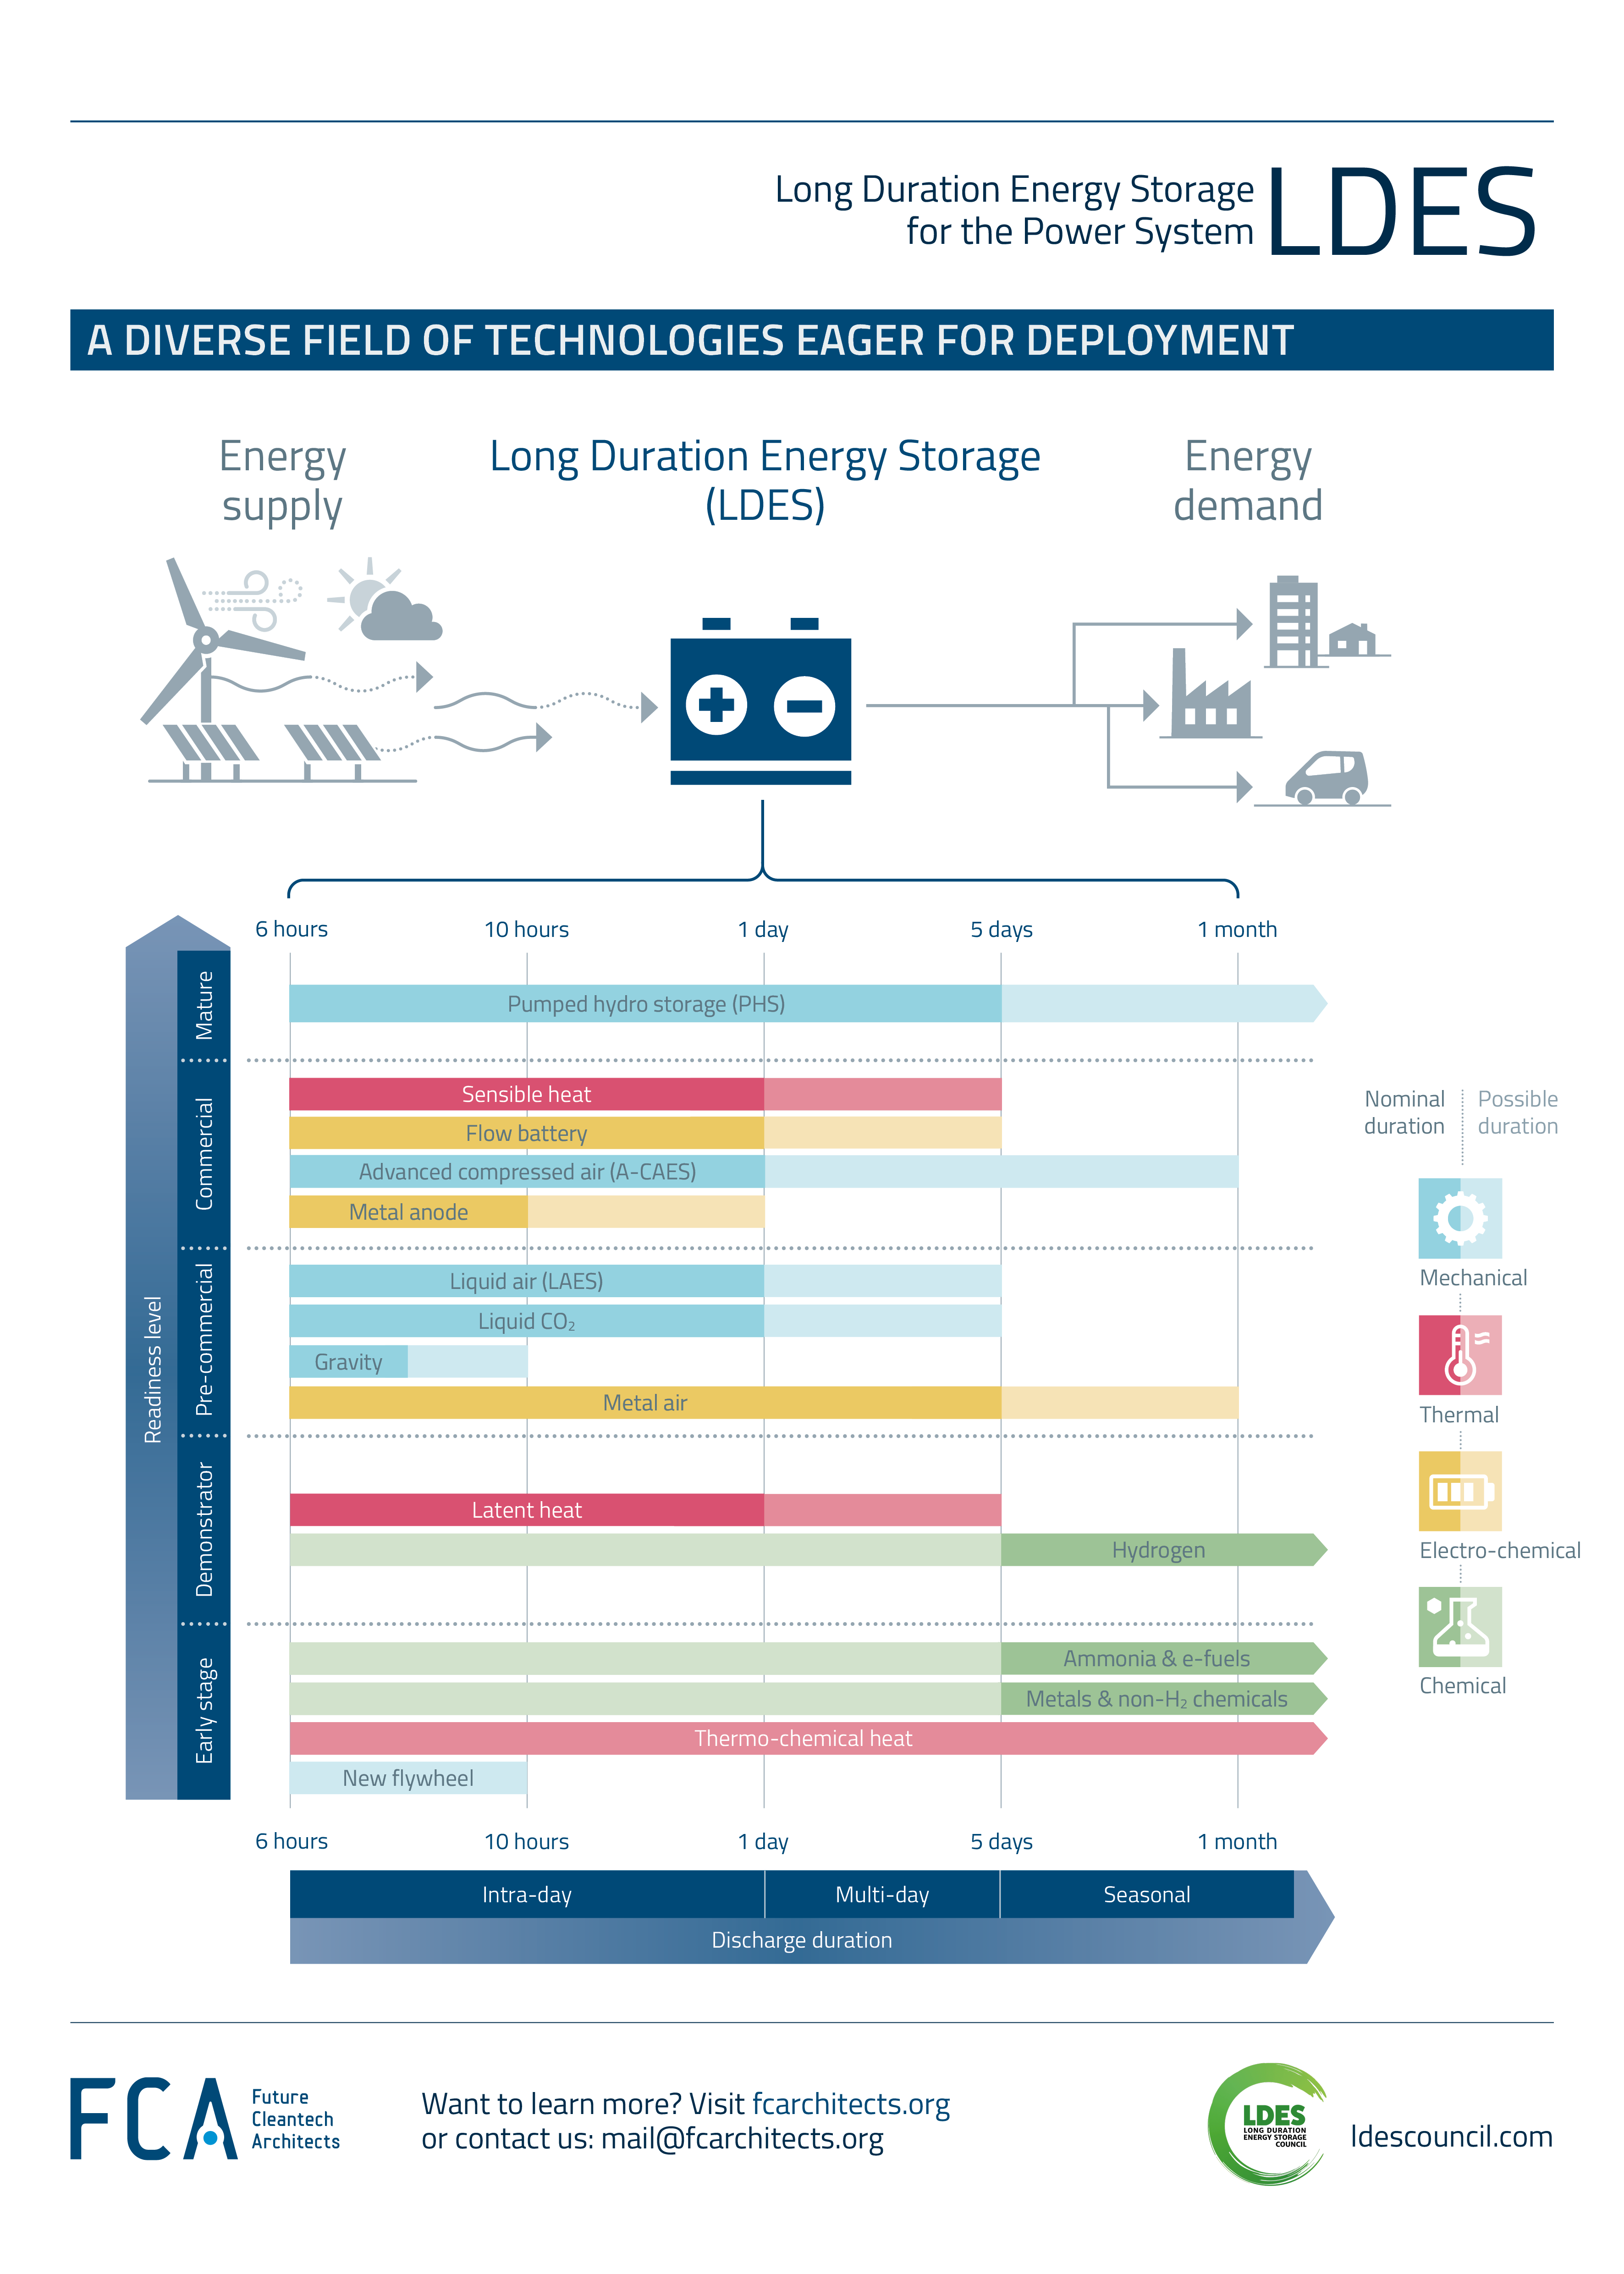 New graph released on LDES for Power Systems: A diverse field of technologies eager for deployment